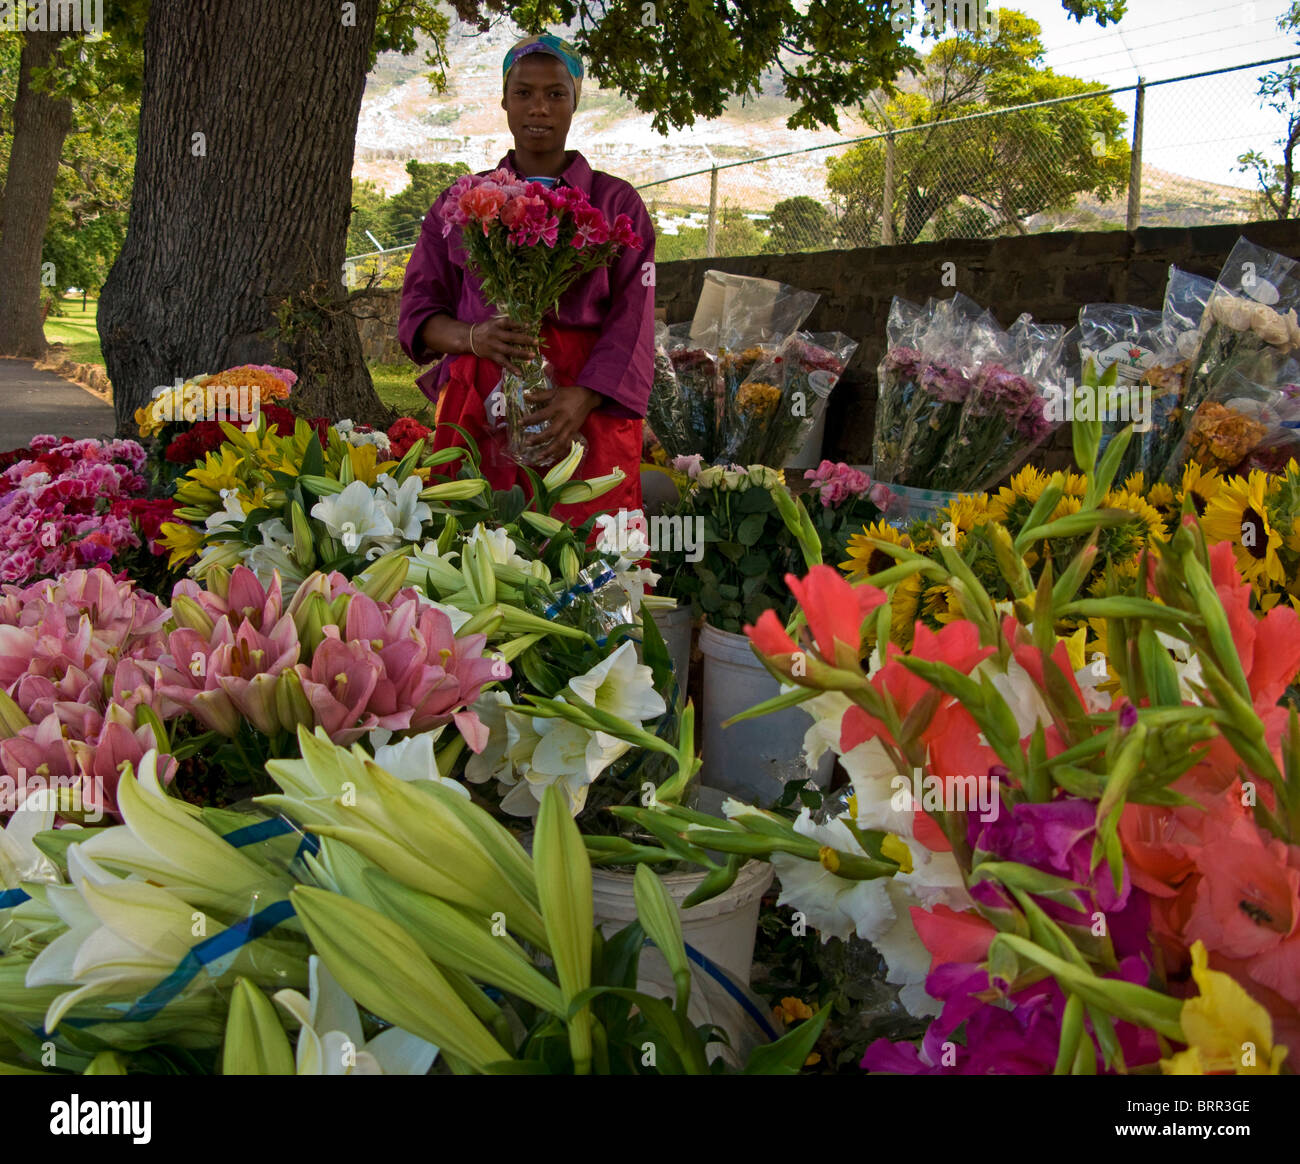 A flower seller displays a wide variety of fresh cut flowers Stock Photo